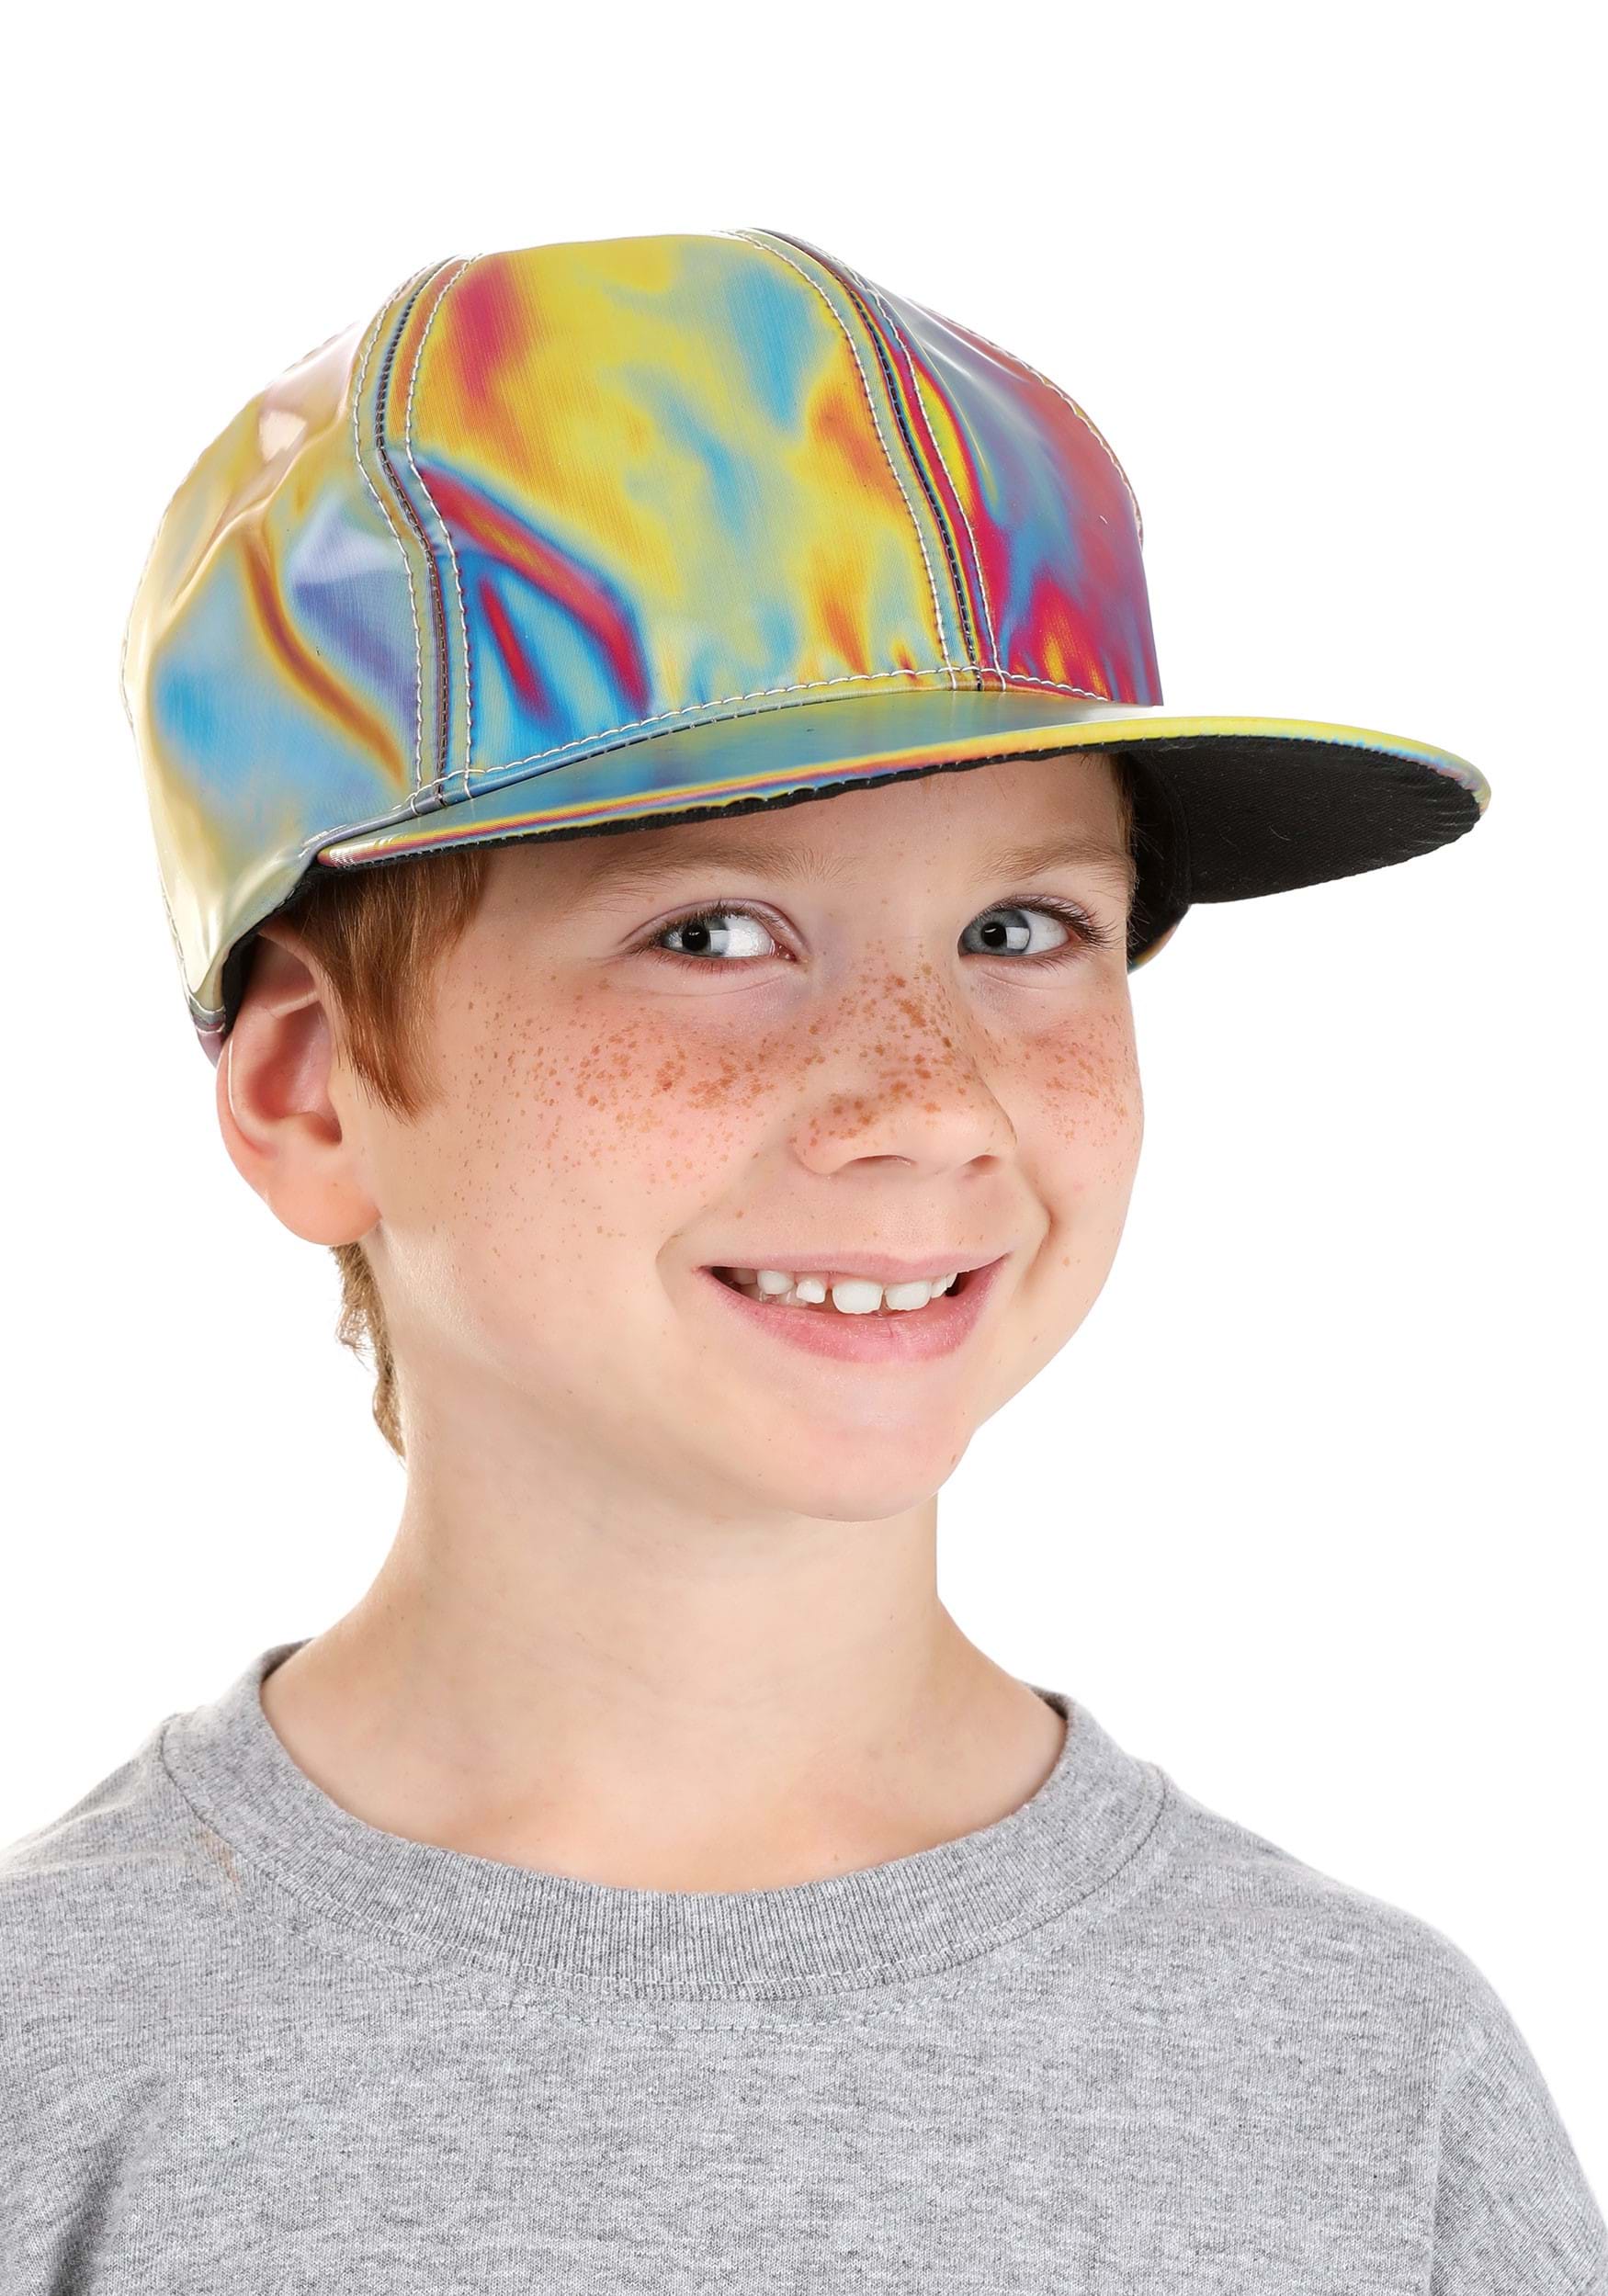 Back To The Future 2 Marty McFly Deluxe Costume Hat For Kids , Movie Accessories